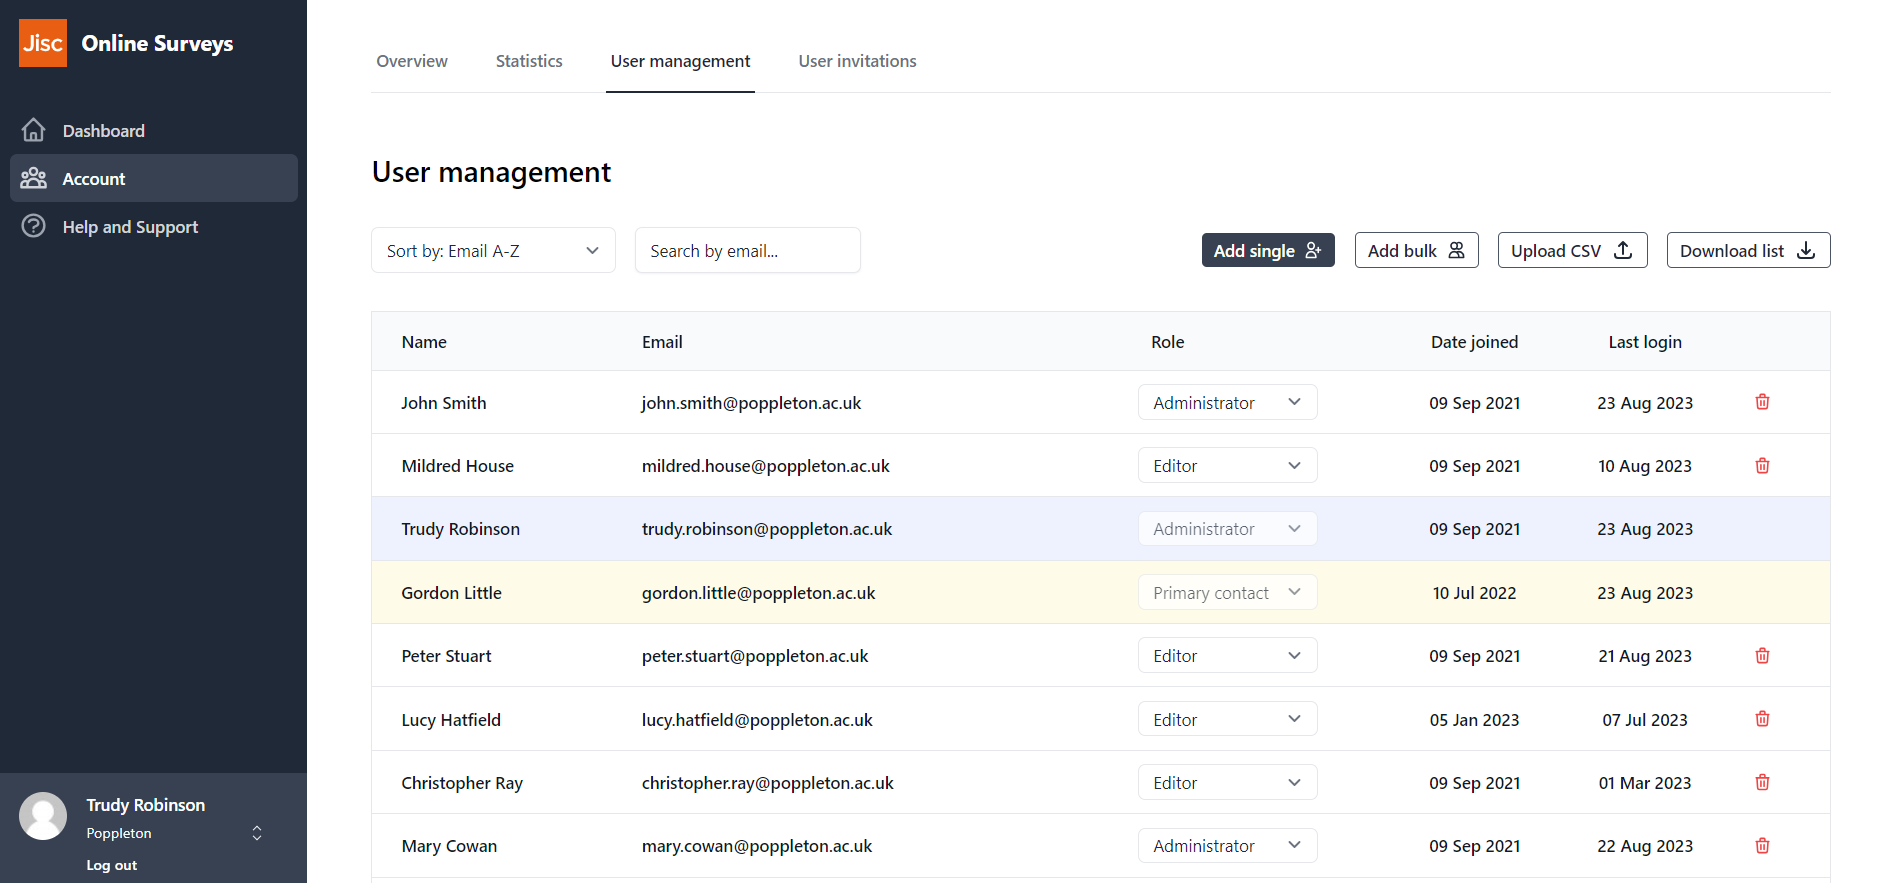 An example user management page.